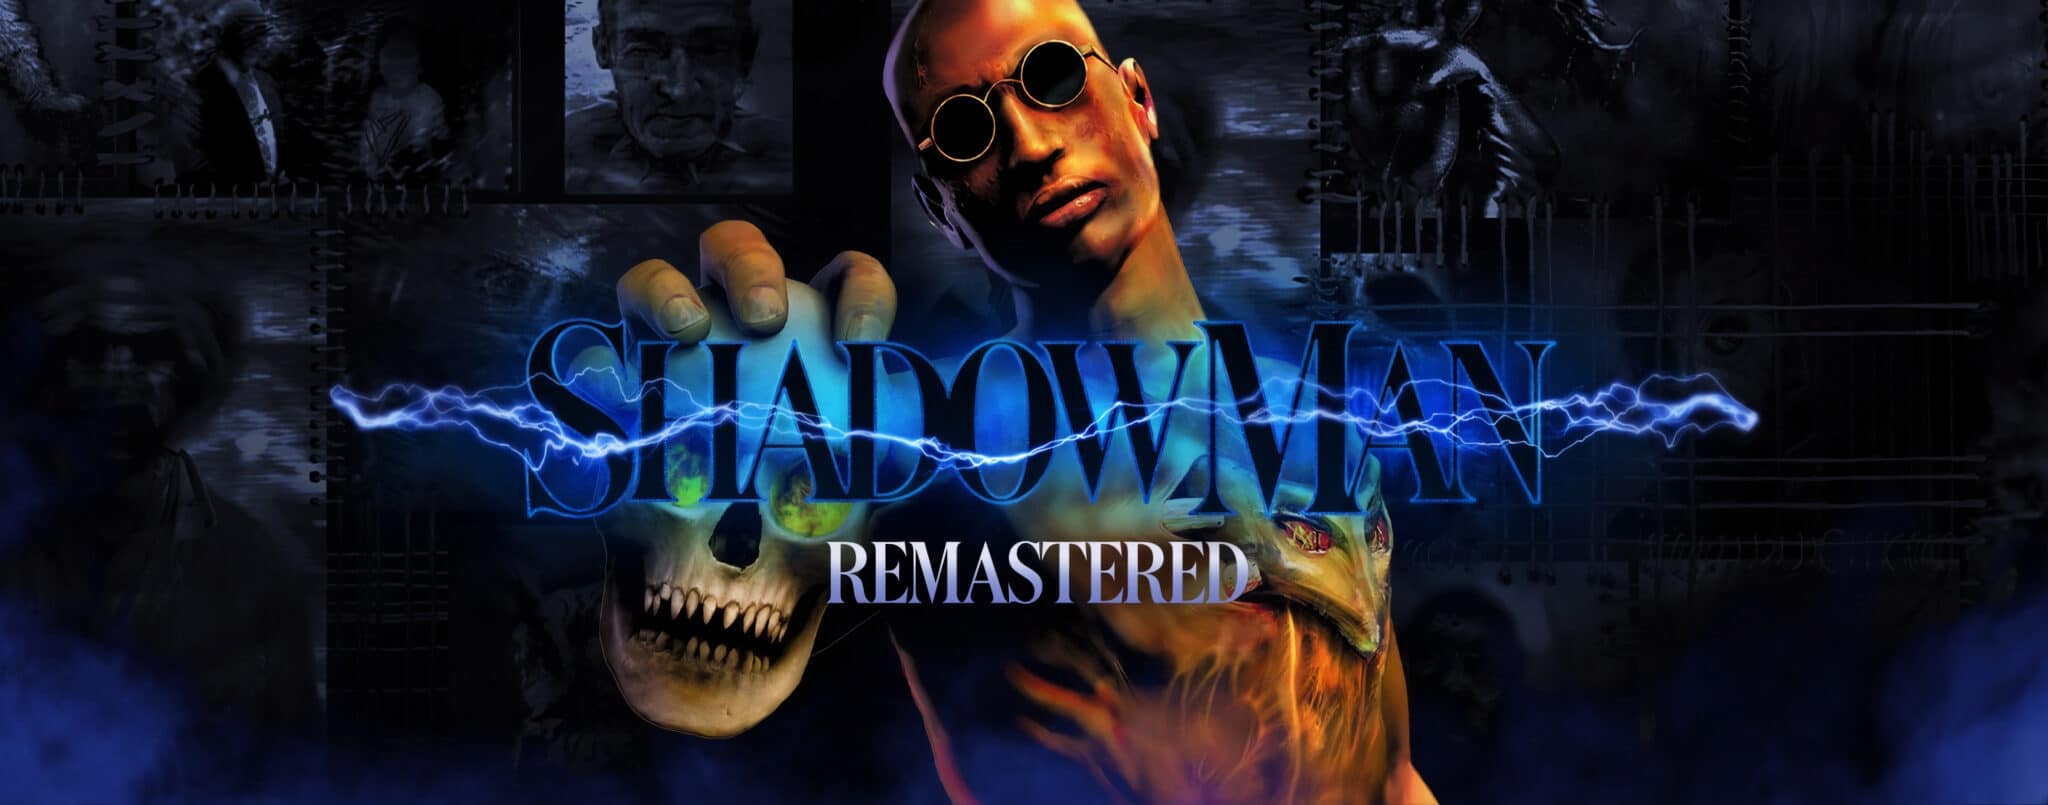 Shadow Man Remastered is coming January 17, 2022